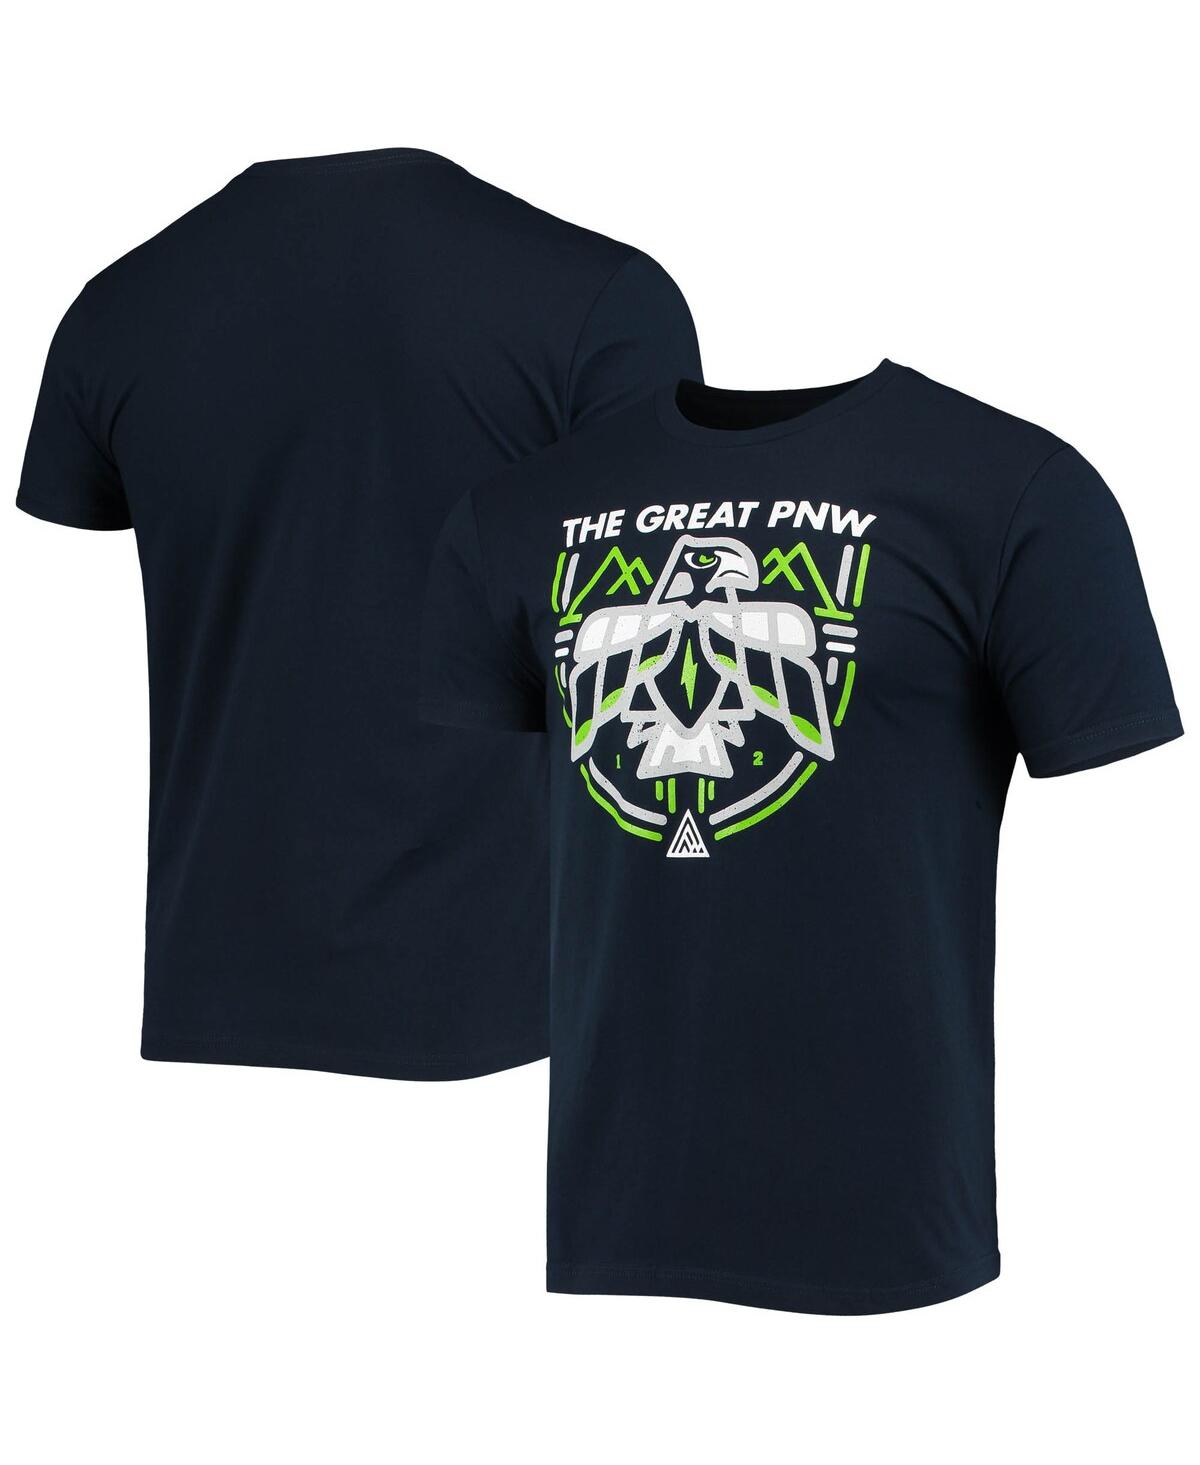 THE GREAT PNW MEN'S THE GREAT PNW COLLEGE NAVY SEATTLE SEAHAWKS HAWK T-SHIRT